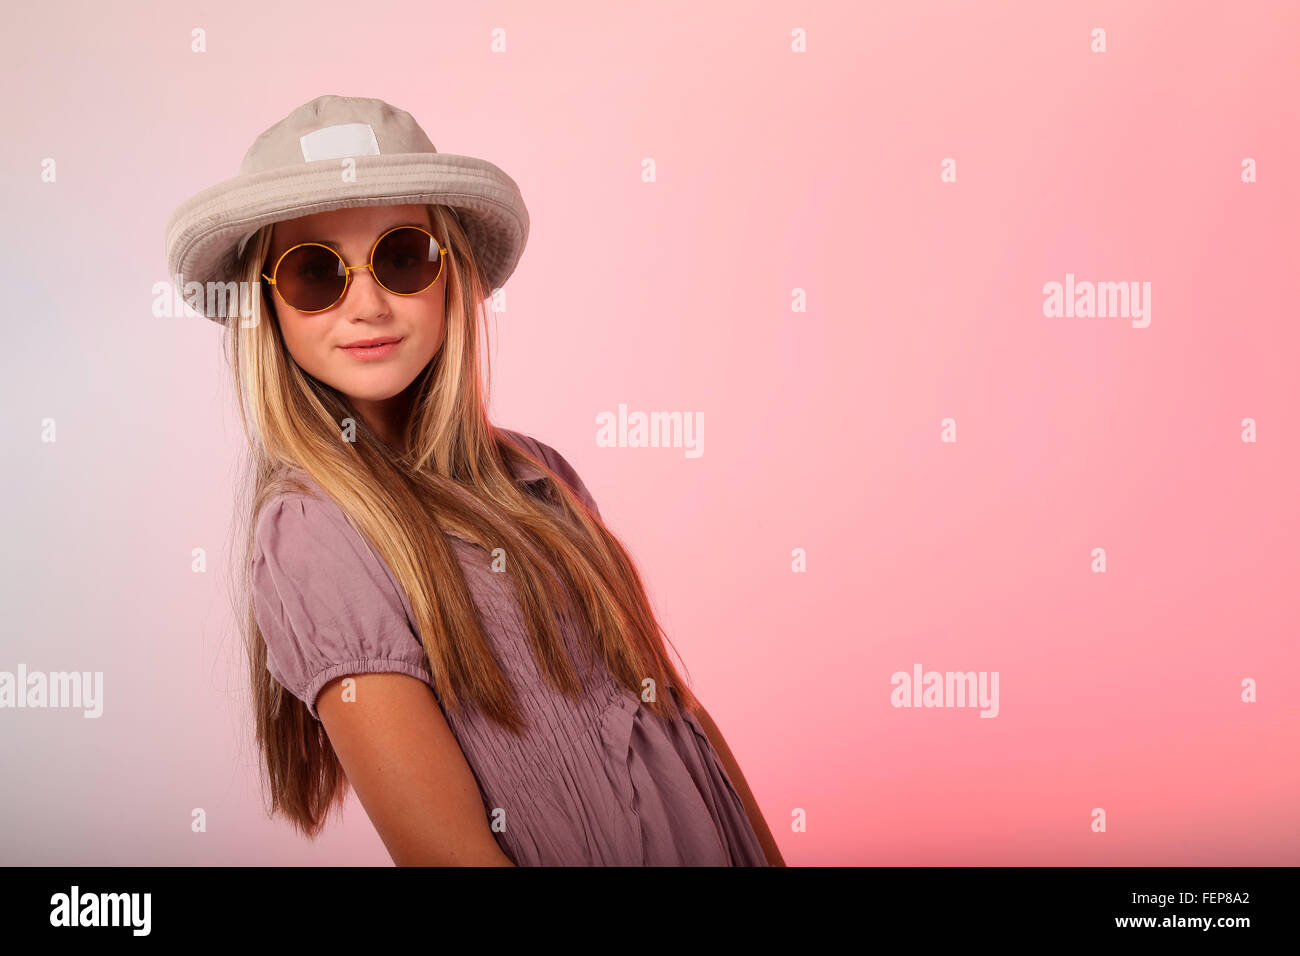 A beautiful blond teenage girl wearing sunglasses in studio, she also has a hat on her head. Stock Photo